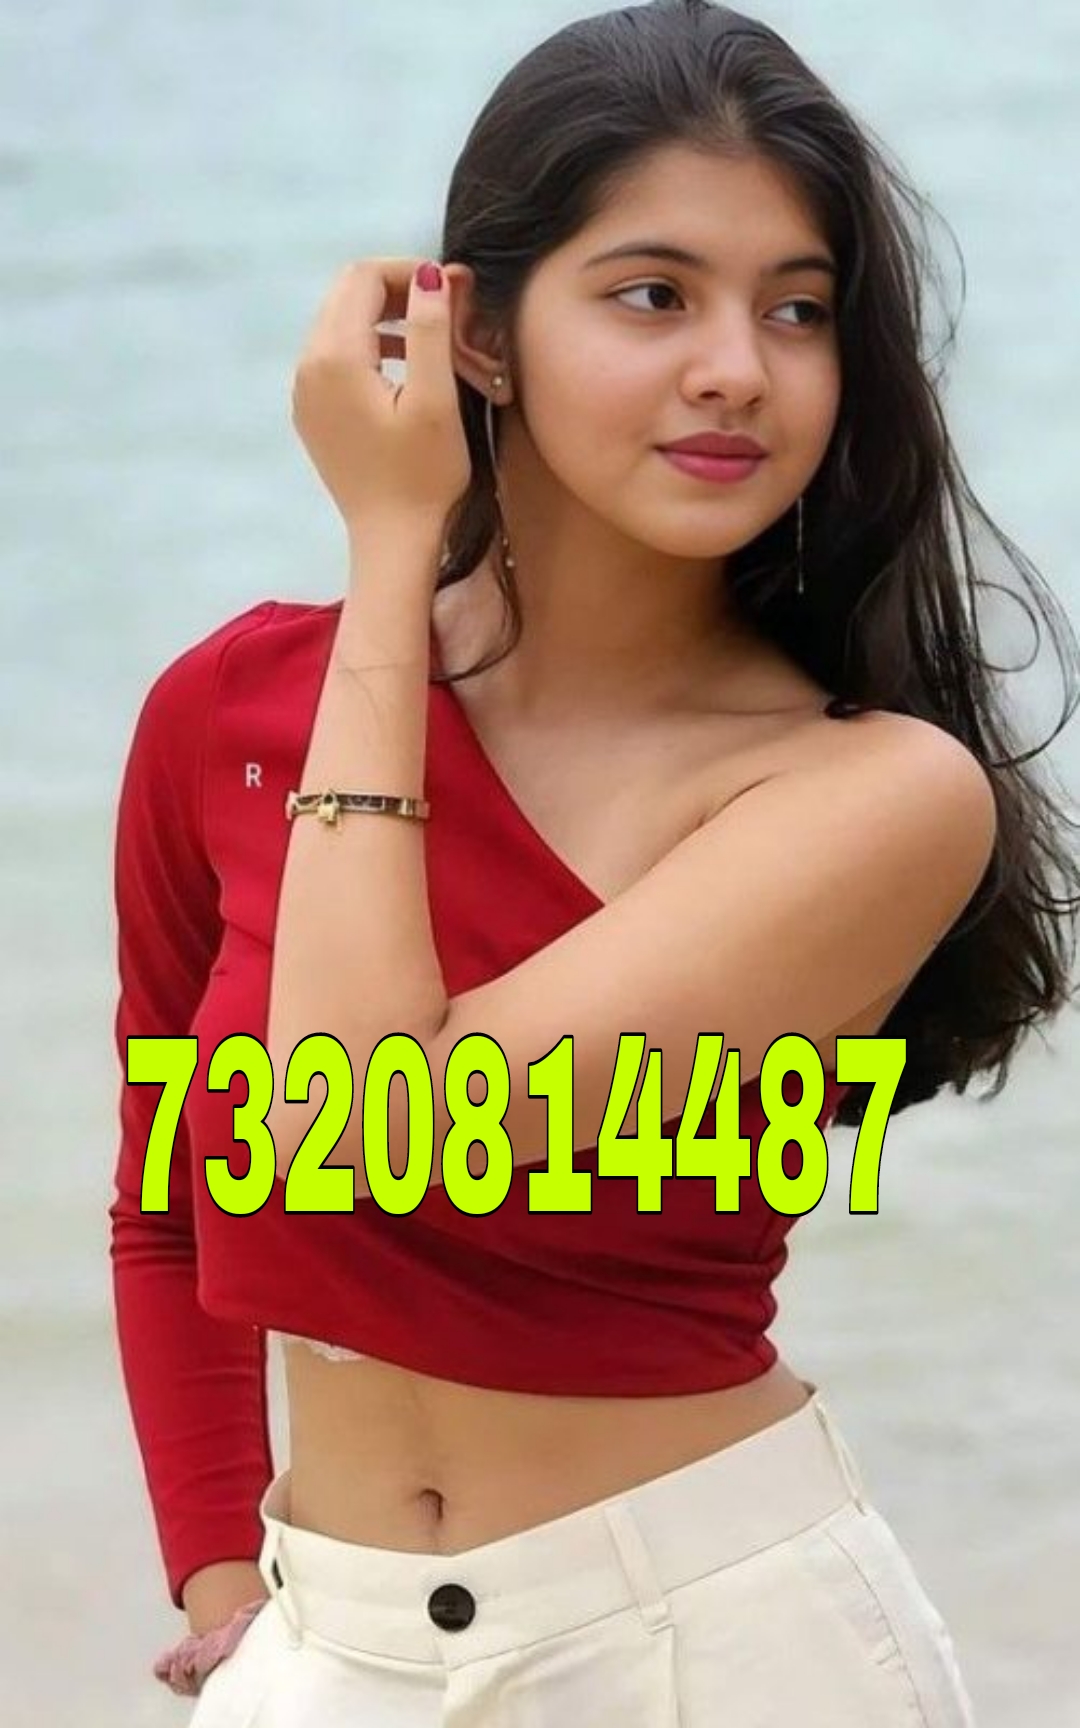 Udaipur Rajasthan girl available top model 